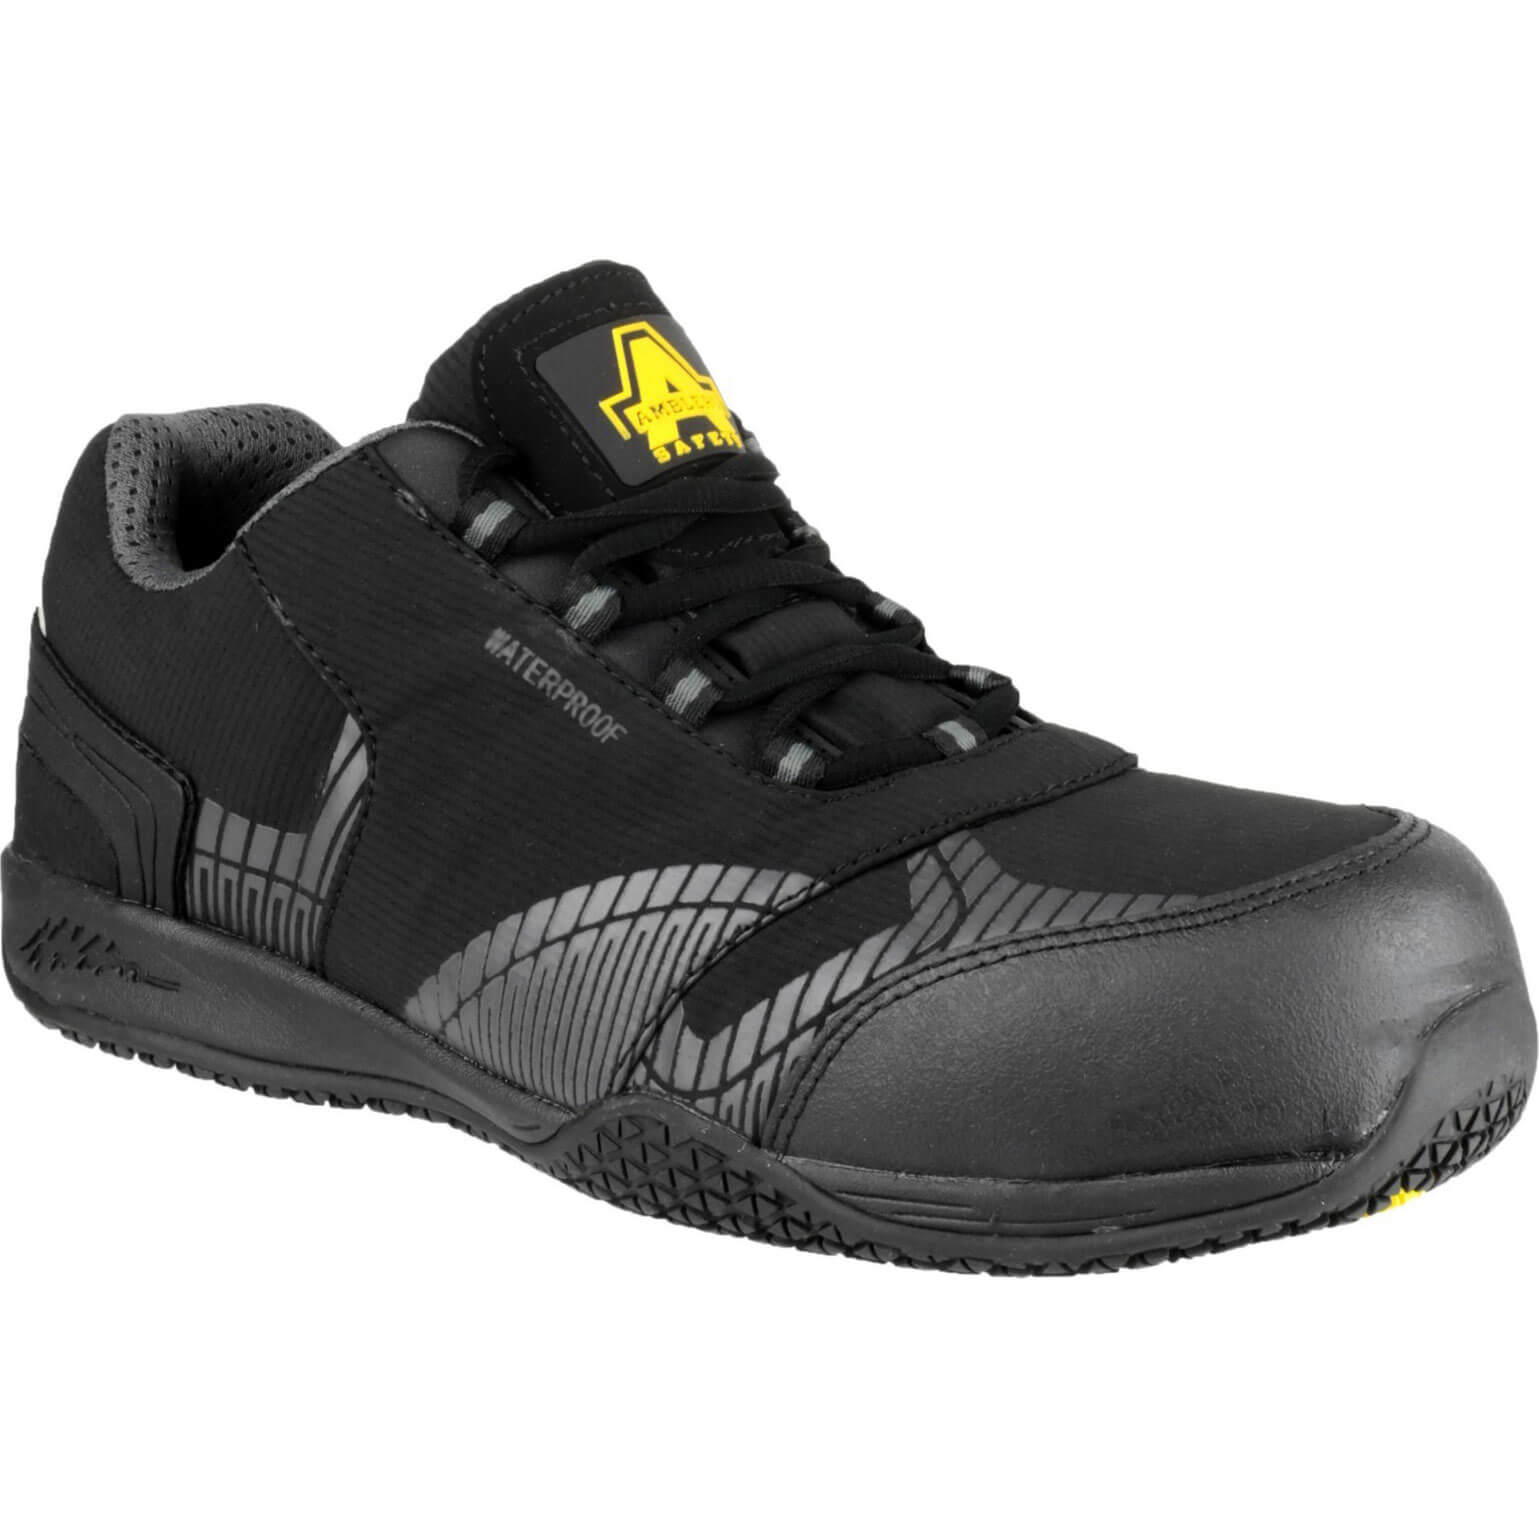 Photo of Amblers Safety Fs29c Waterproof Metal Free Non Leather Safety Trainer Black Size 10